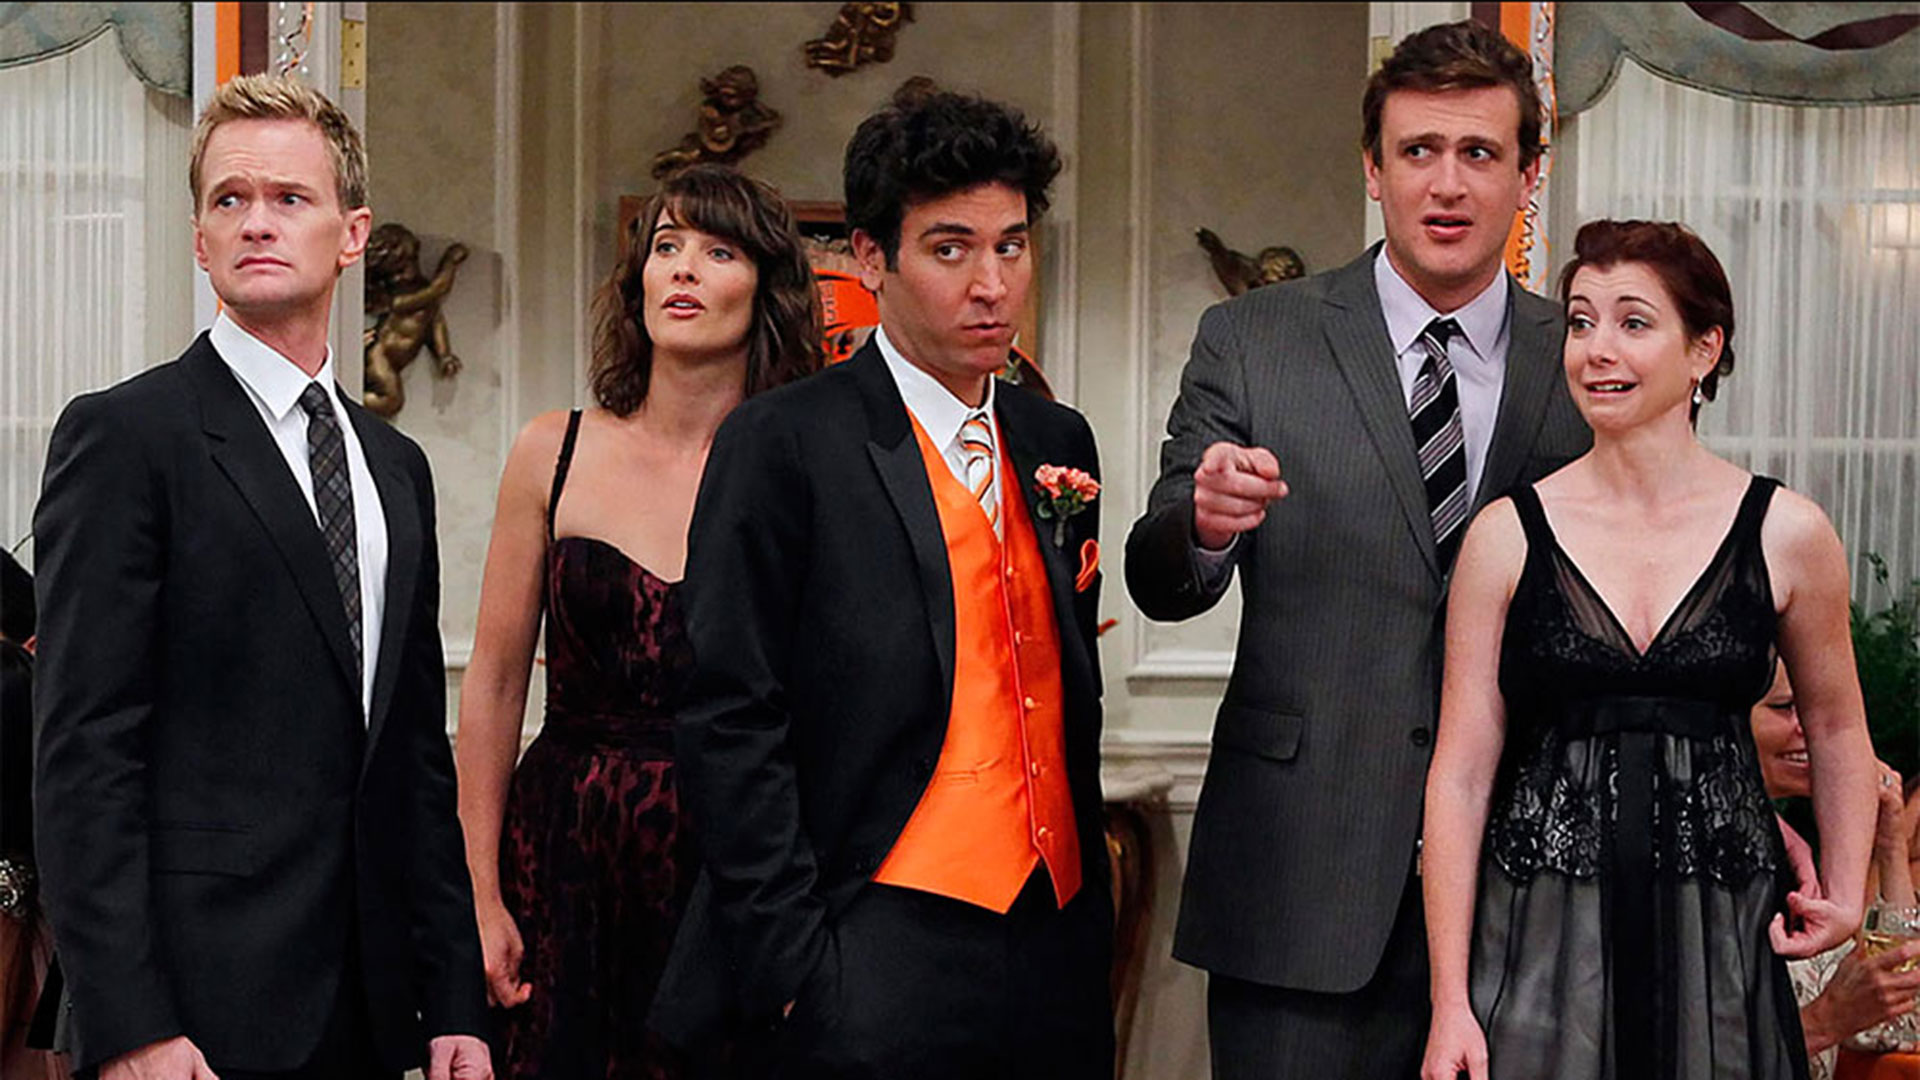 'How I Met Your Mother' (2005), series directed by Pamela Fryman and Rob Greenberg